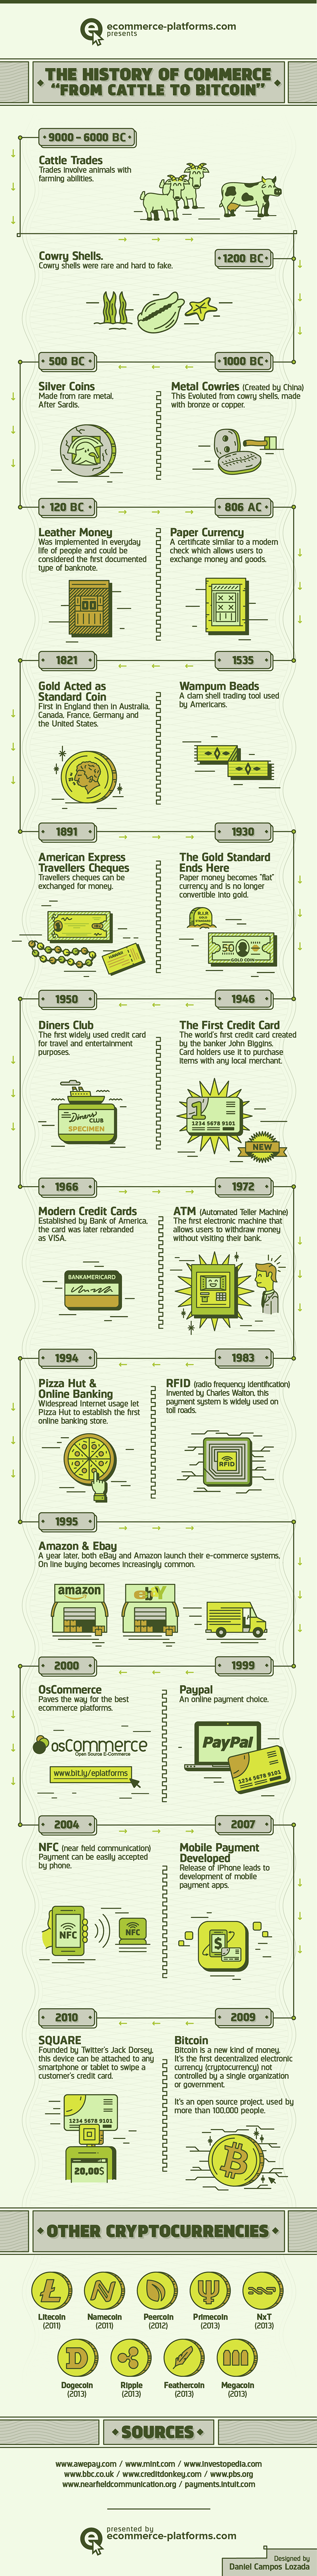 History of Commerce: From Cattle to Bitcoin